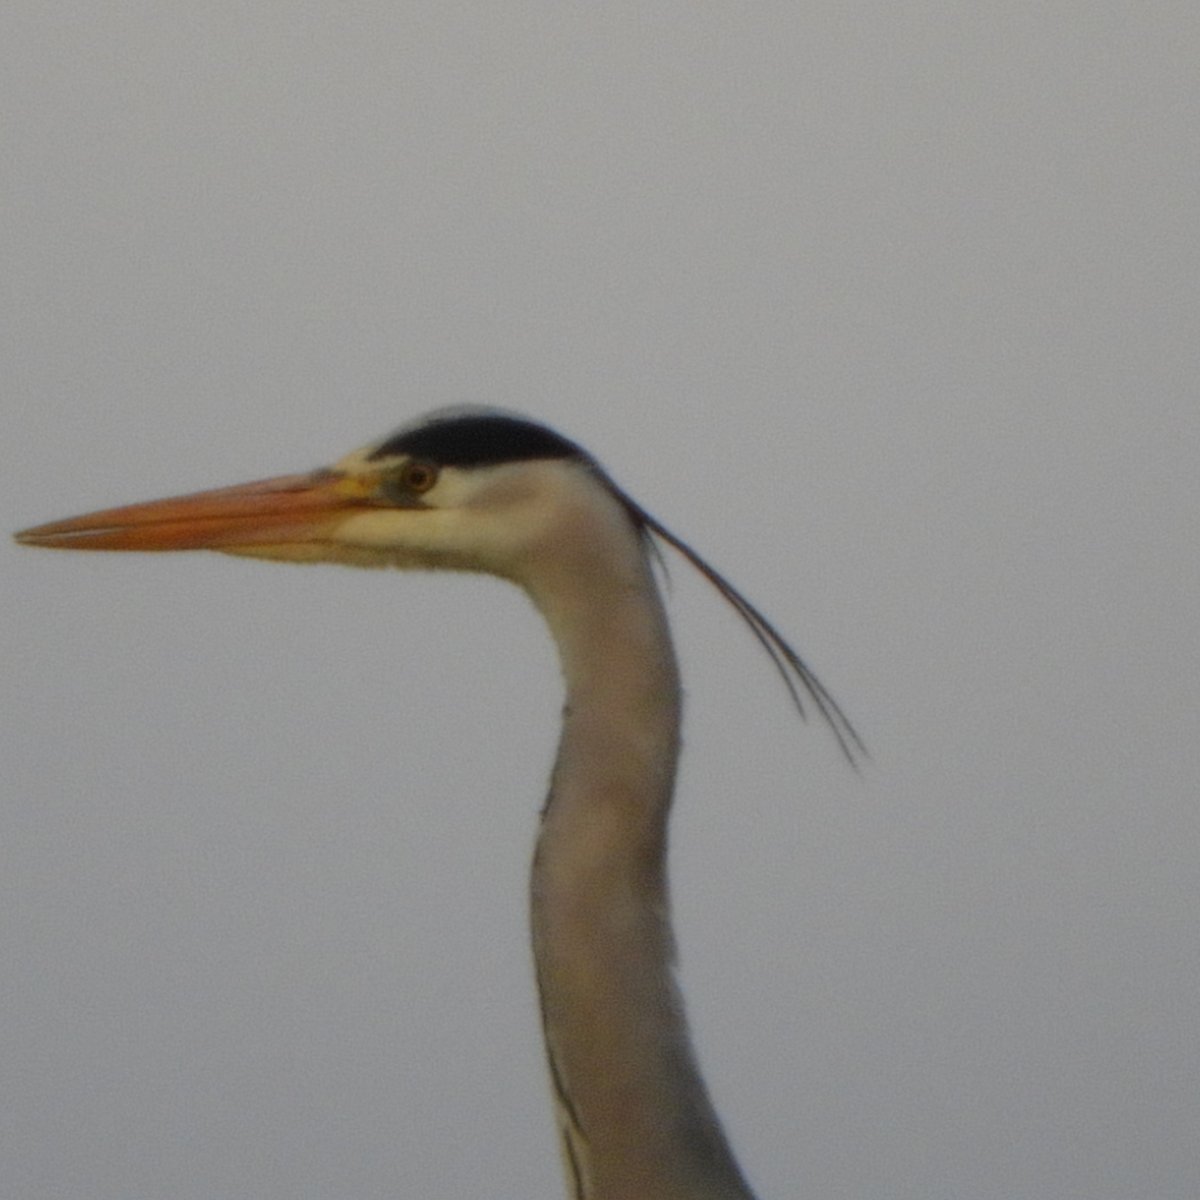 In photo 1, what do you see in the tree beyond the building? This is what I saw. #Heron #Twitterbirds #wildbirds